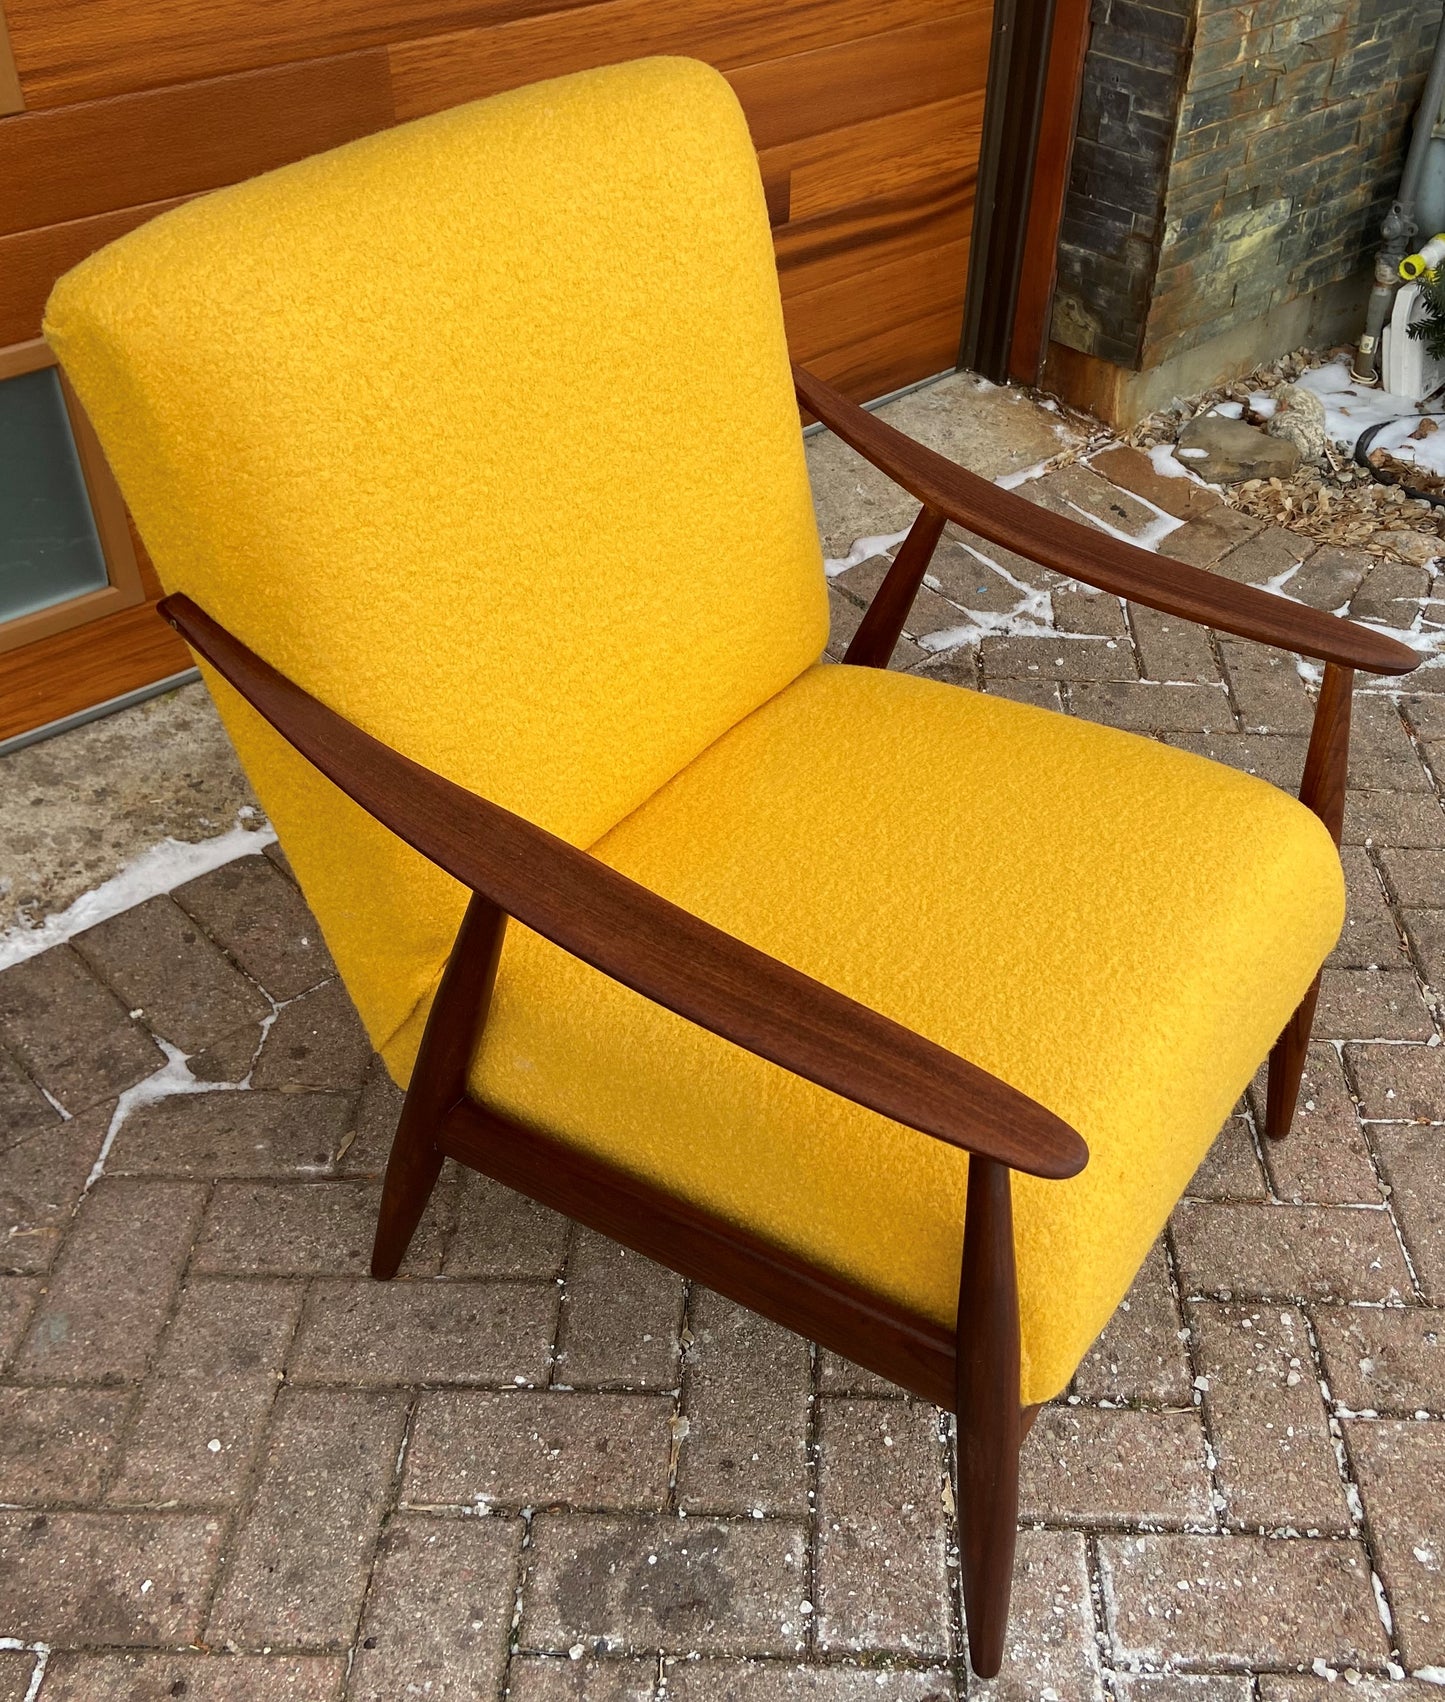 REFINISHED REUPHOLSTERED Mid-Century Modern Teak Armchair